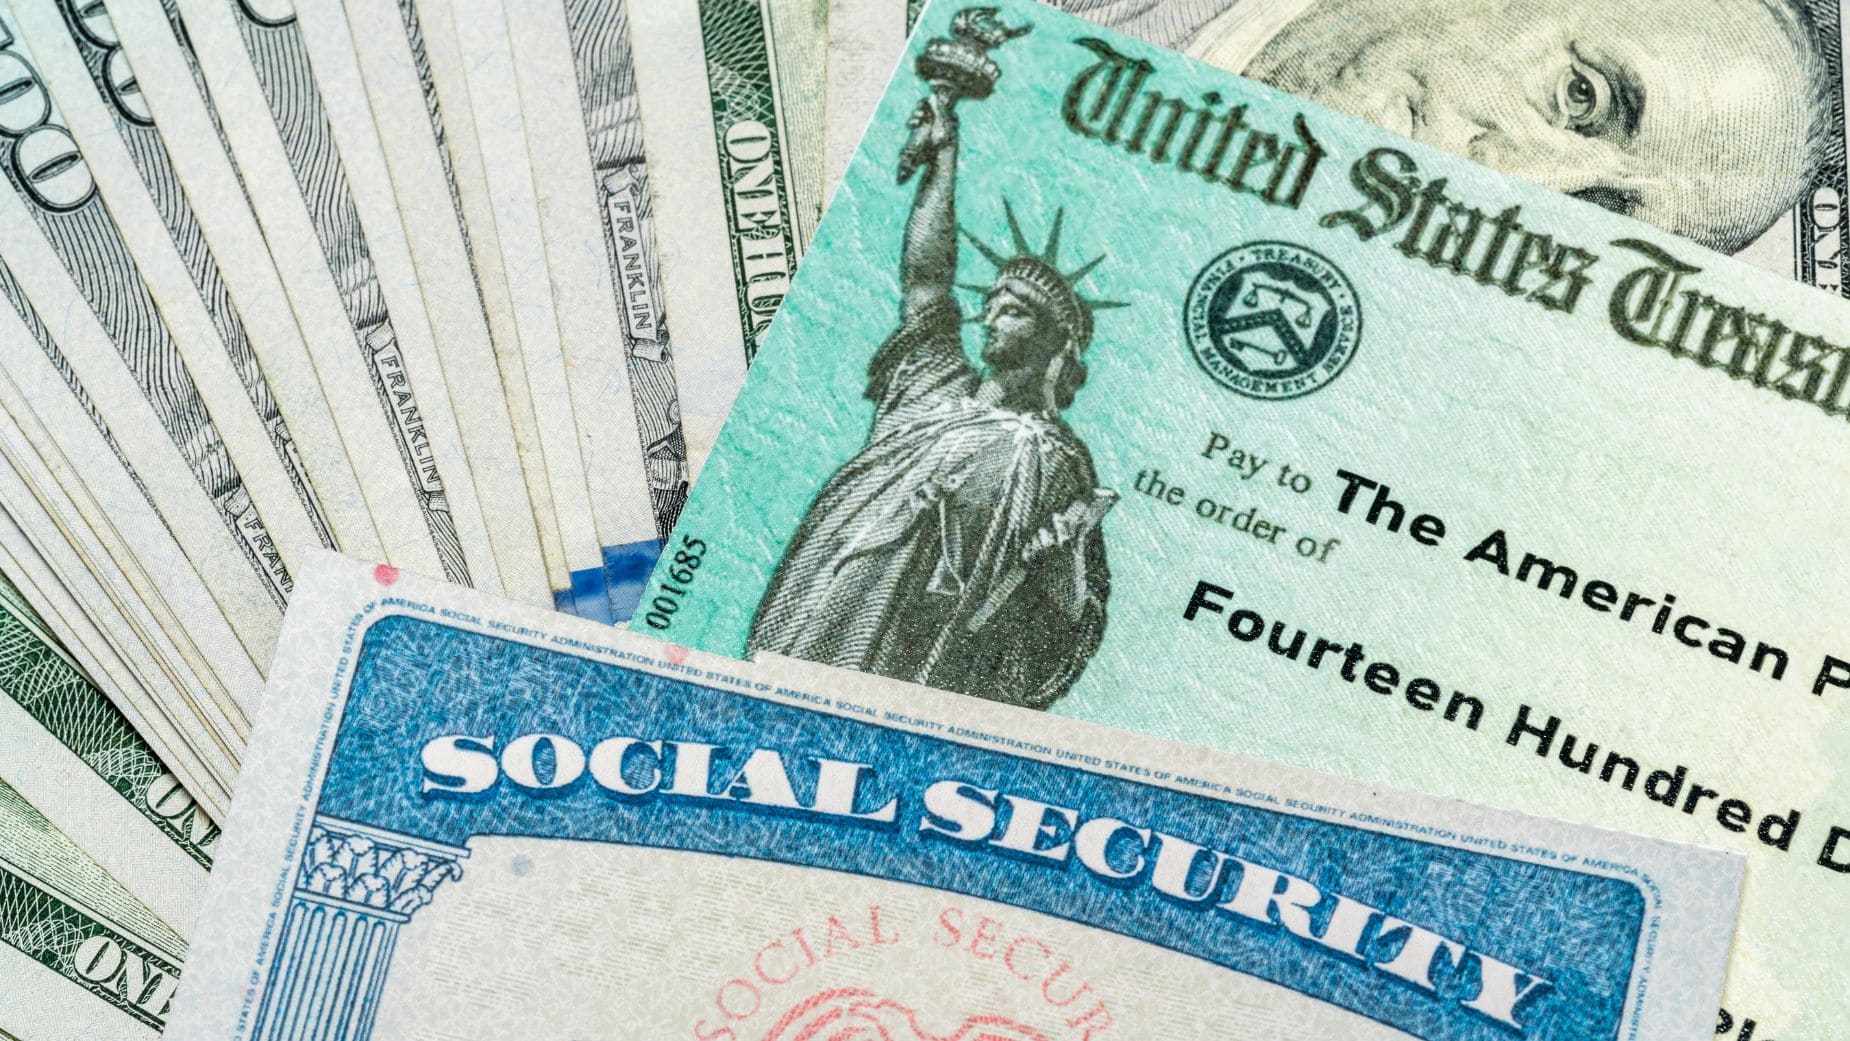 The stimulus check from Social Security is really close